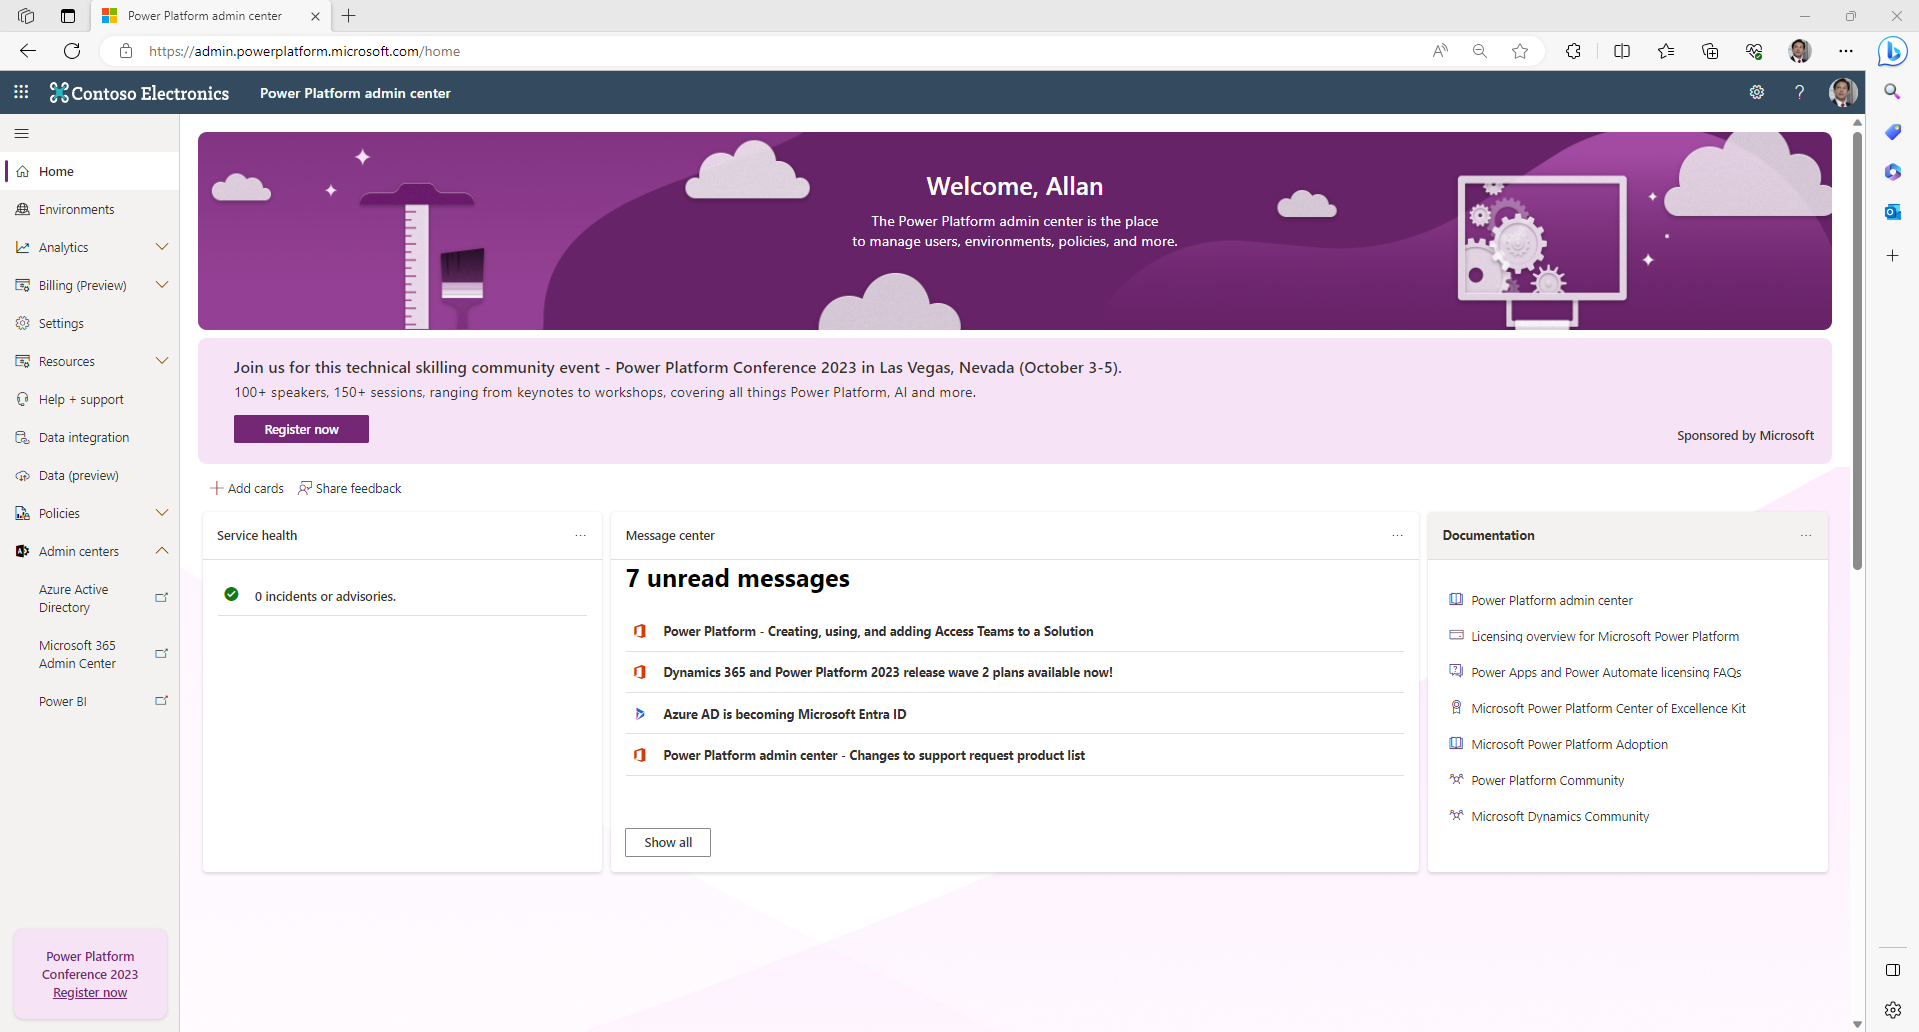 Opening page of the Power Platform admin center.